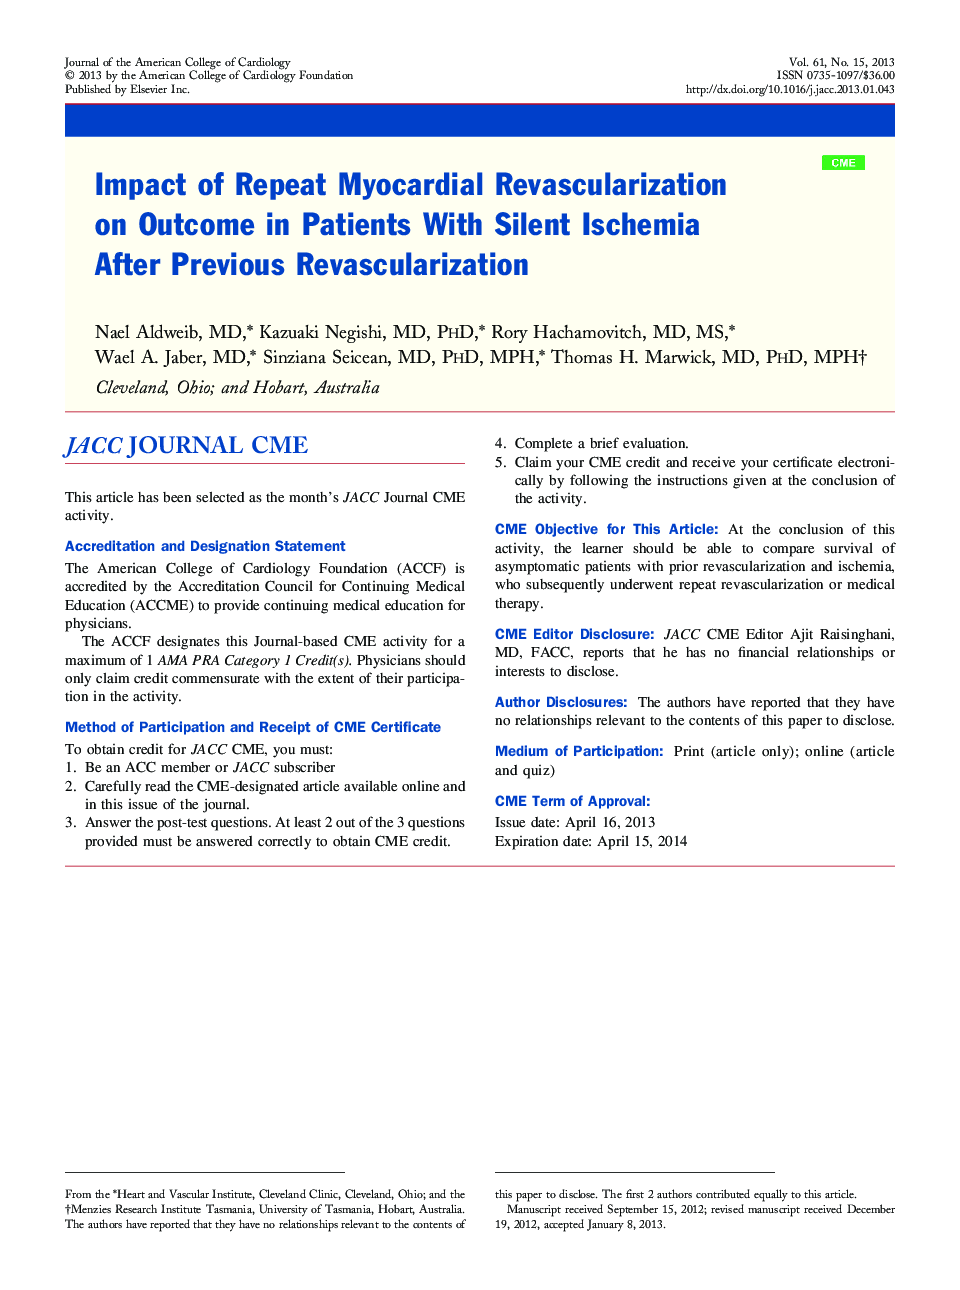 Impact of Repeat Myocardial Revascularization on Outcome in Patients With Silent Ischemia After Previous Revascularization 